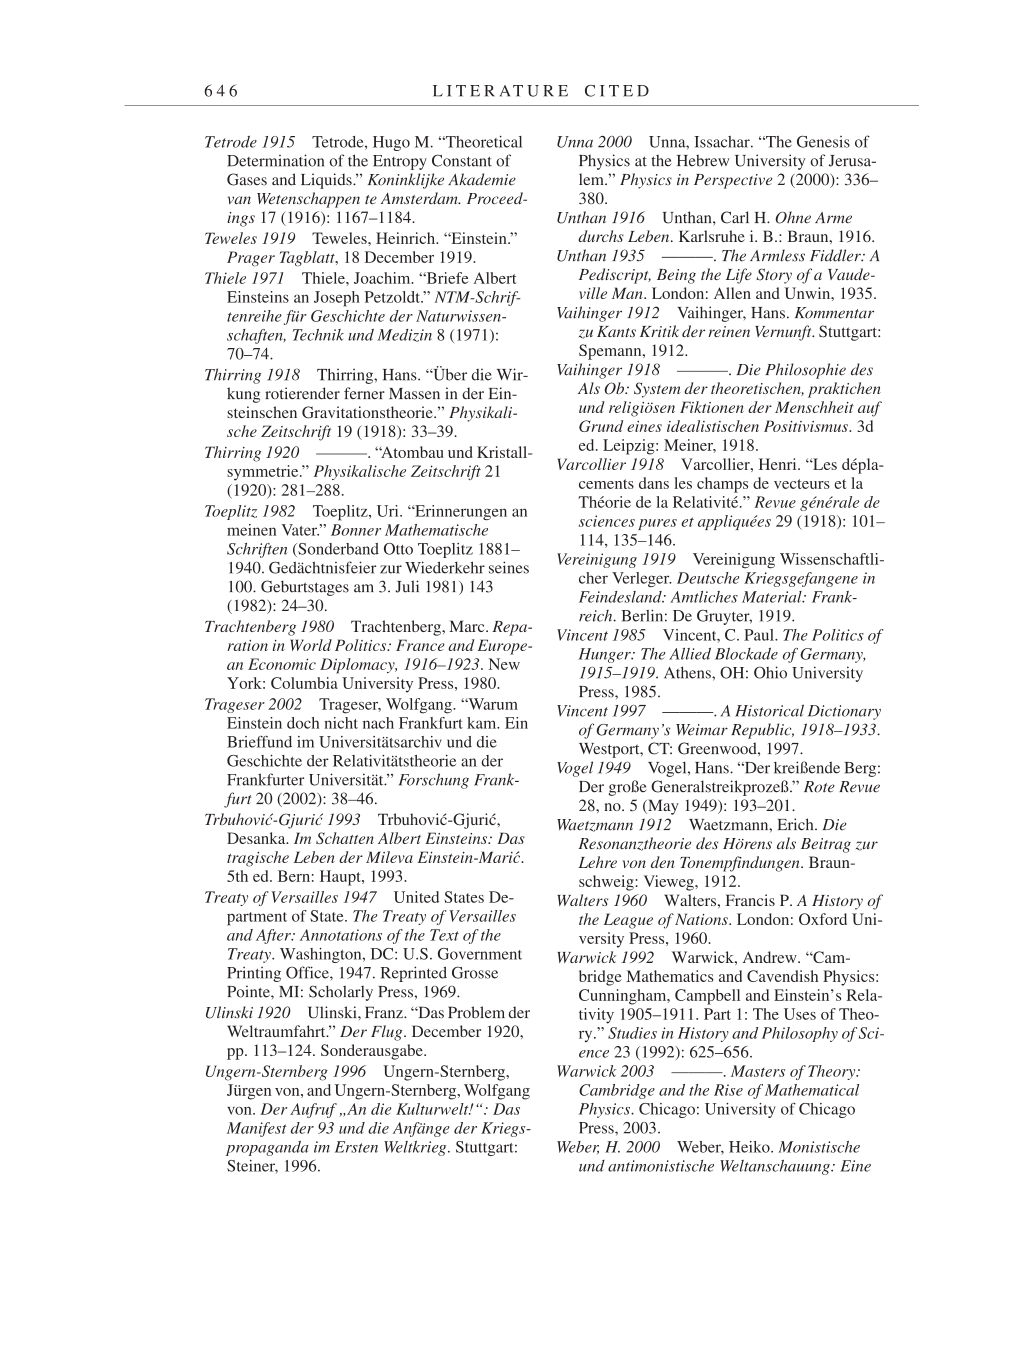 Volume 9: The Berlin Years: Correspondence January 1919-April 1920 page 646